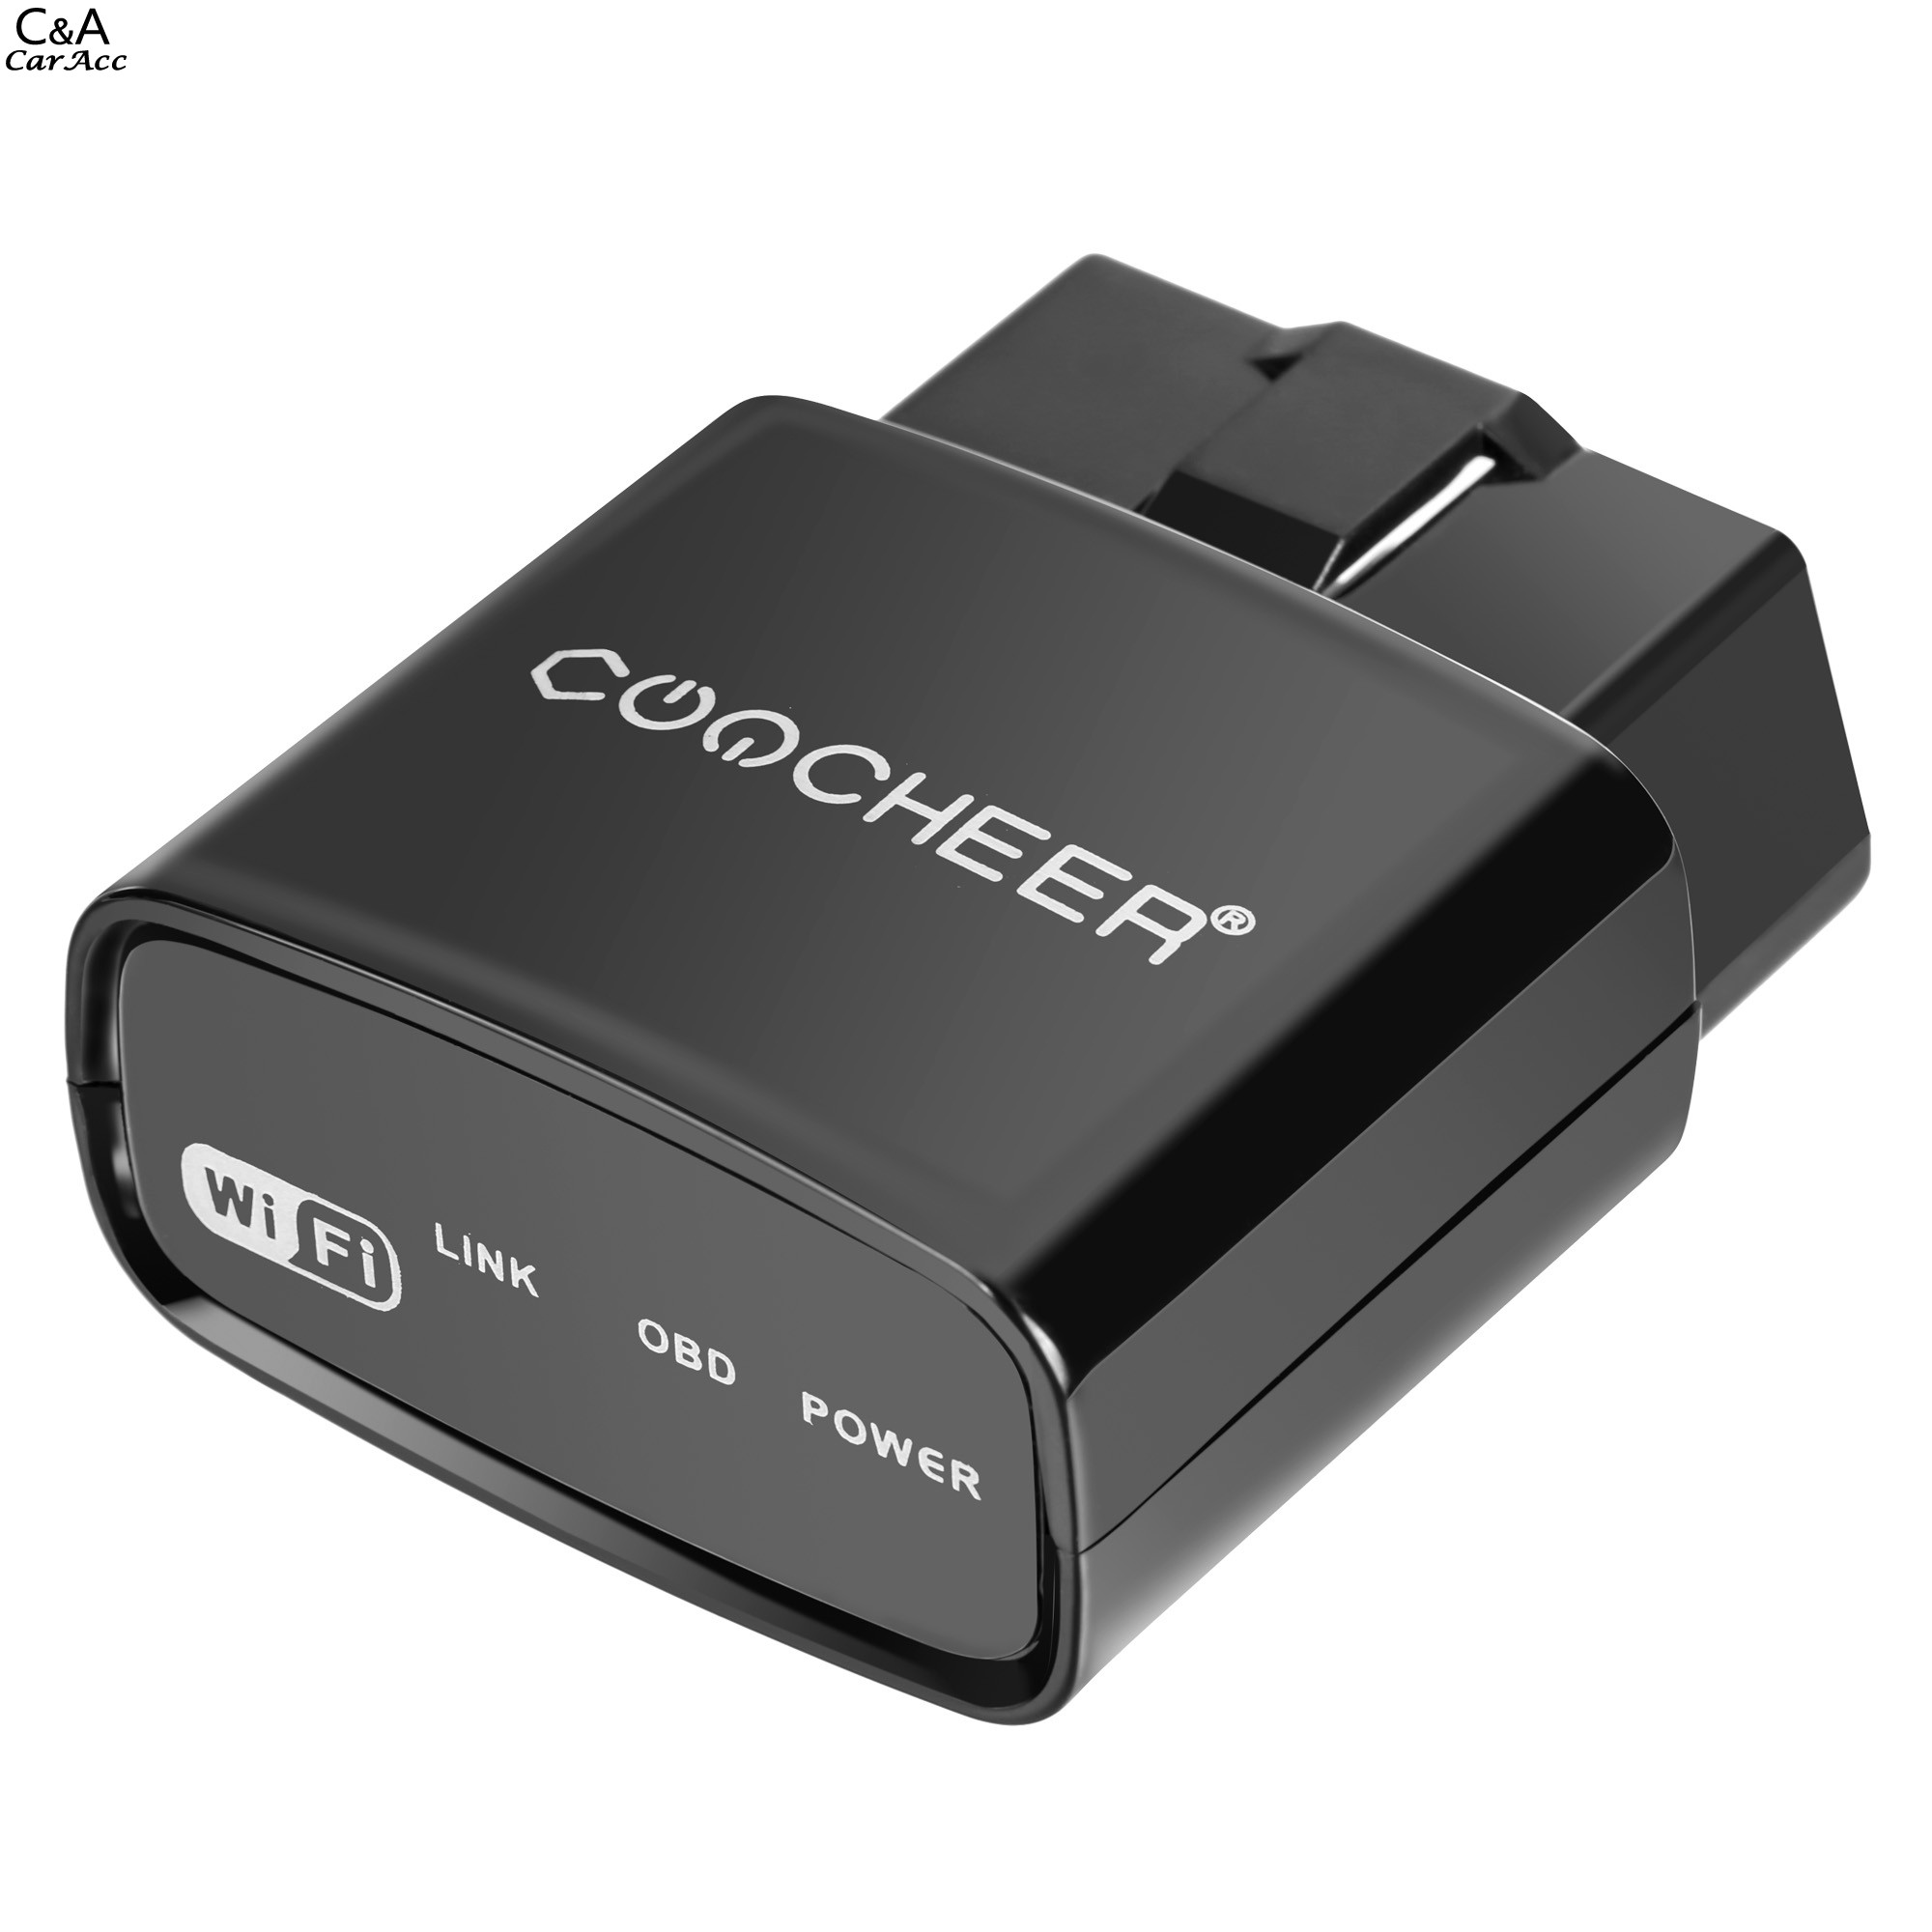 2016  Coocheer -  wi-fi OBD    Android  IOS   US68